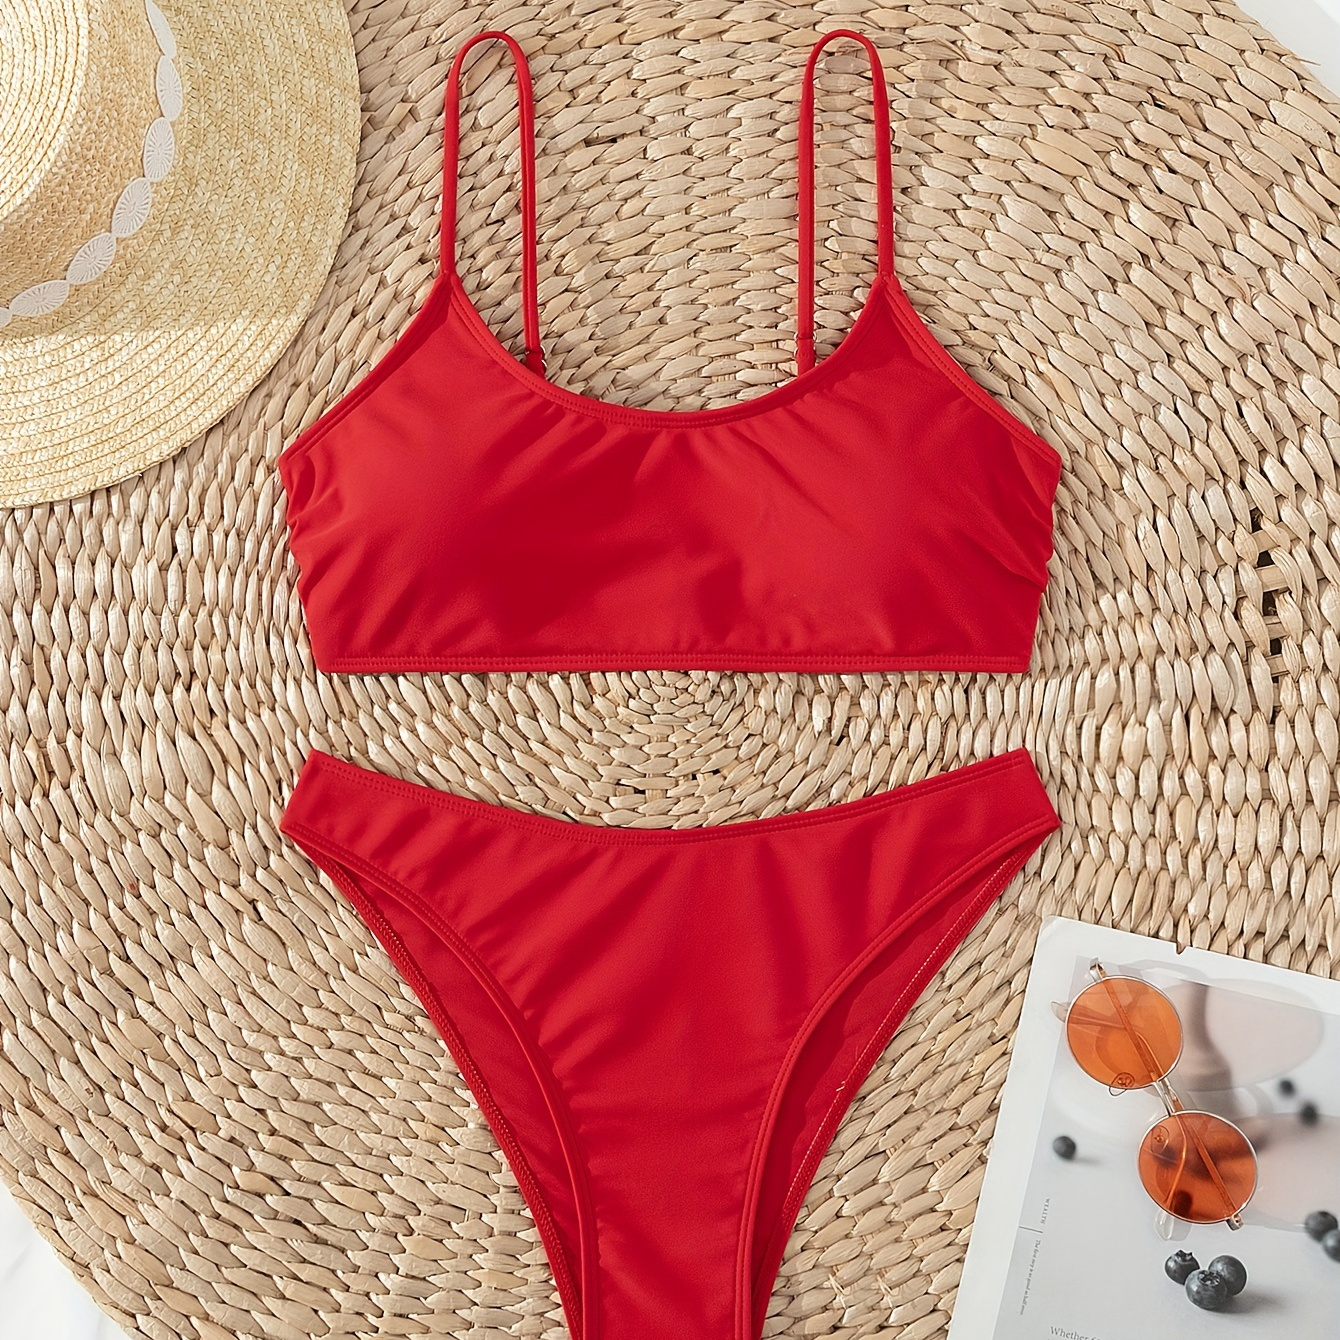 

Women's Two-piece Bikini Set, High Cut Bottoms, Adjustable Straps, Comfort Fit Swimwear For Beach And Pool